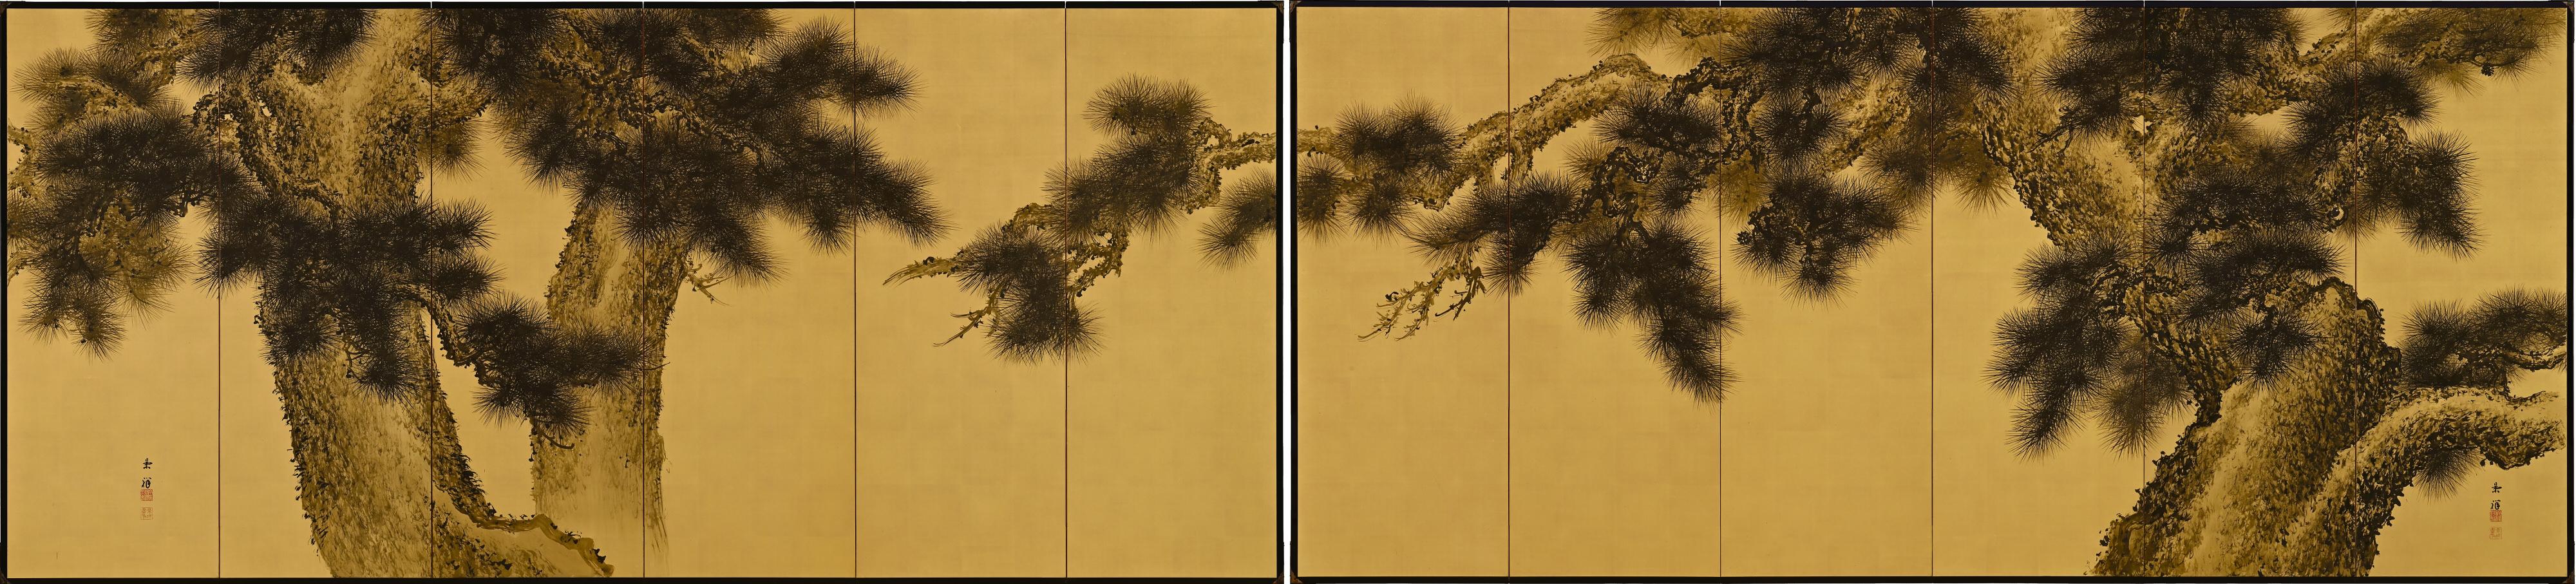 Imao Keisho (1902-1993)

Pine Trees

Early 20th Century, Circa 1930

Pair of six-panel Japanese screens. Ink on silk and gold leaf.

Dimensions: Each screen H. 67.5” x 148” (172 cm x 376 cm)

A pair of monumental six-panel Japanese pine screens by